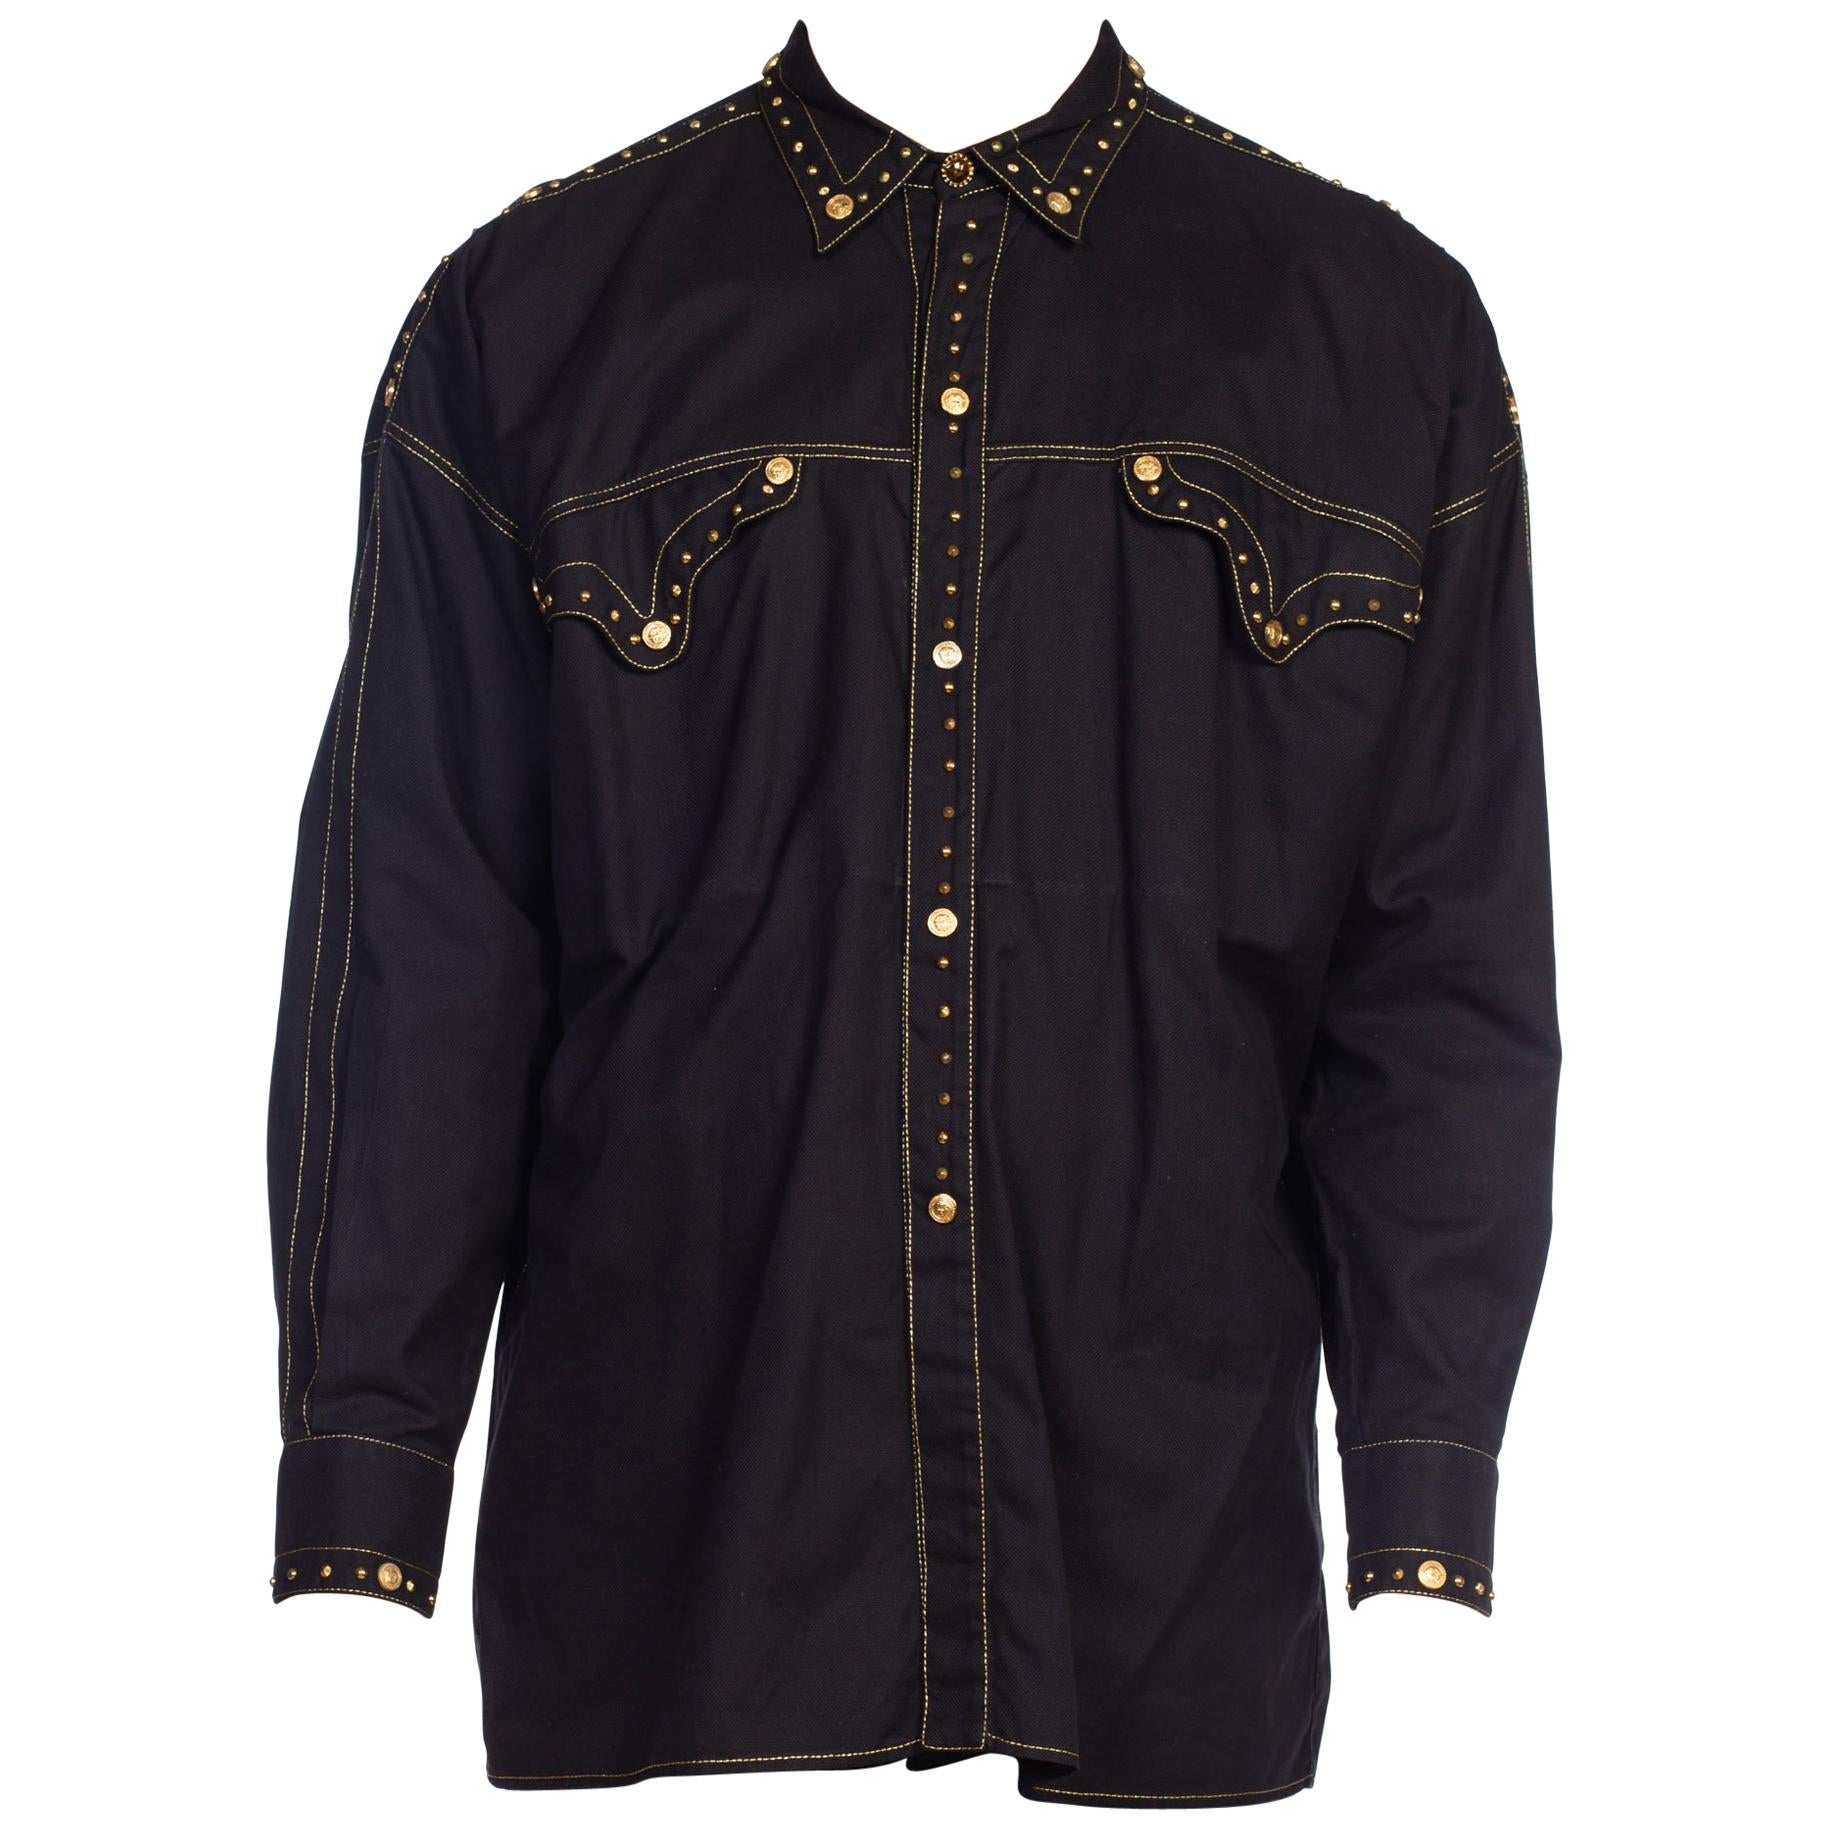 1990S GIANNI VERSACE Men's Shirt With Gold Medusa Studs & Metallic Embroidery